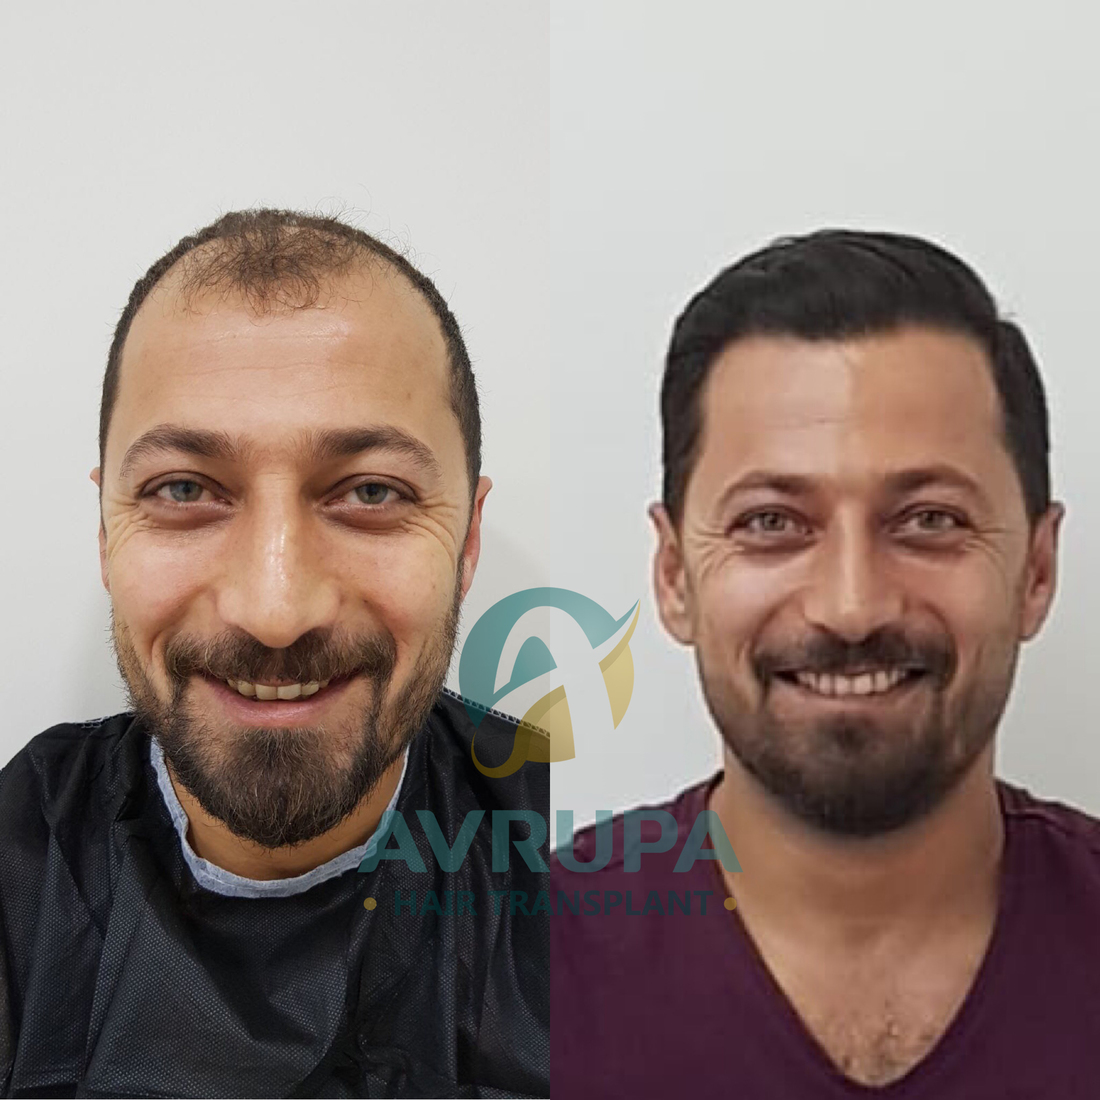 FUE Hair Transplant Results : 10 Real Cases With Photos - Clinic Advisor